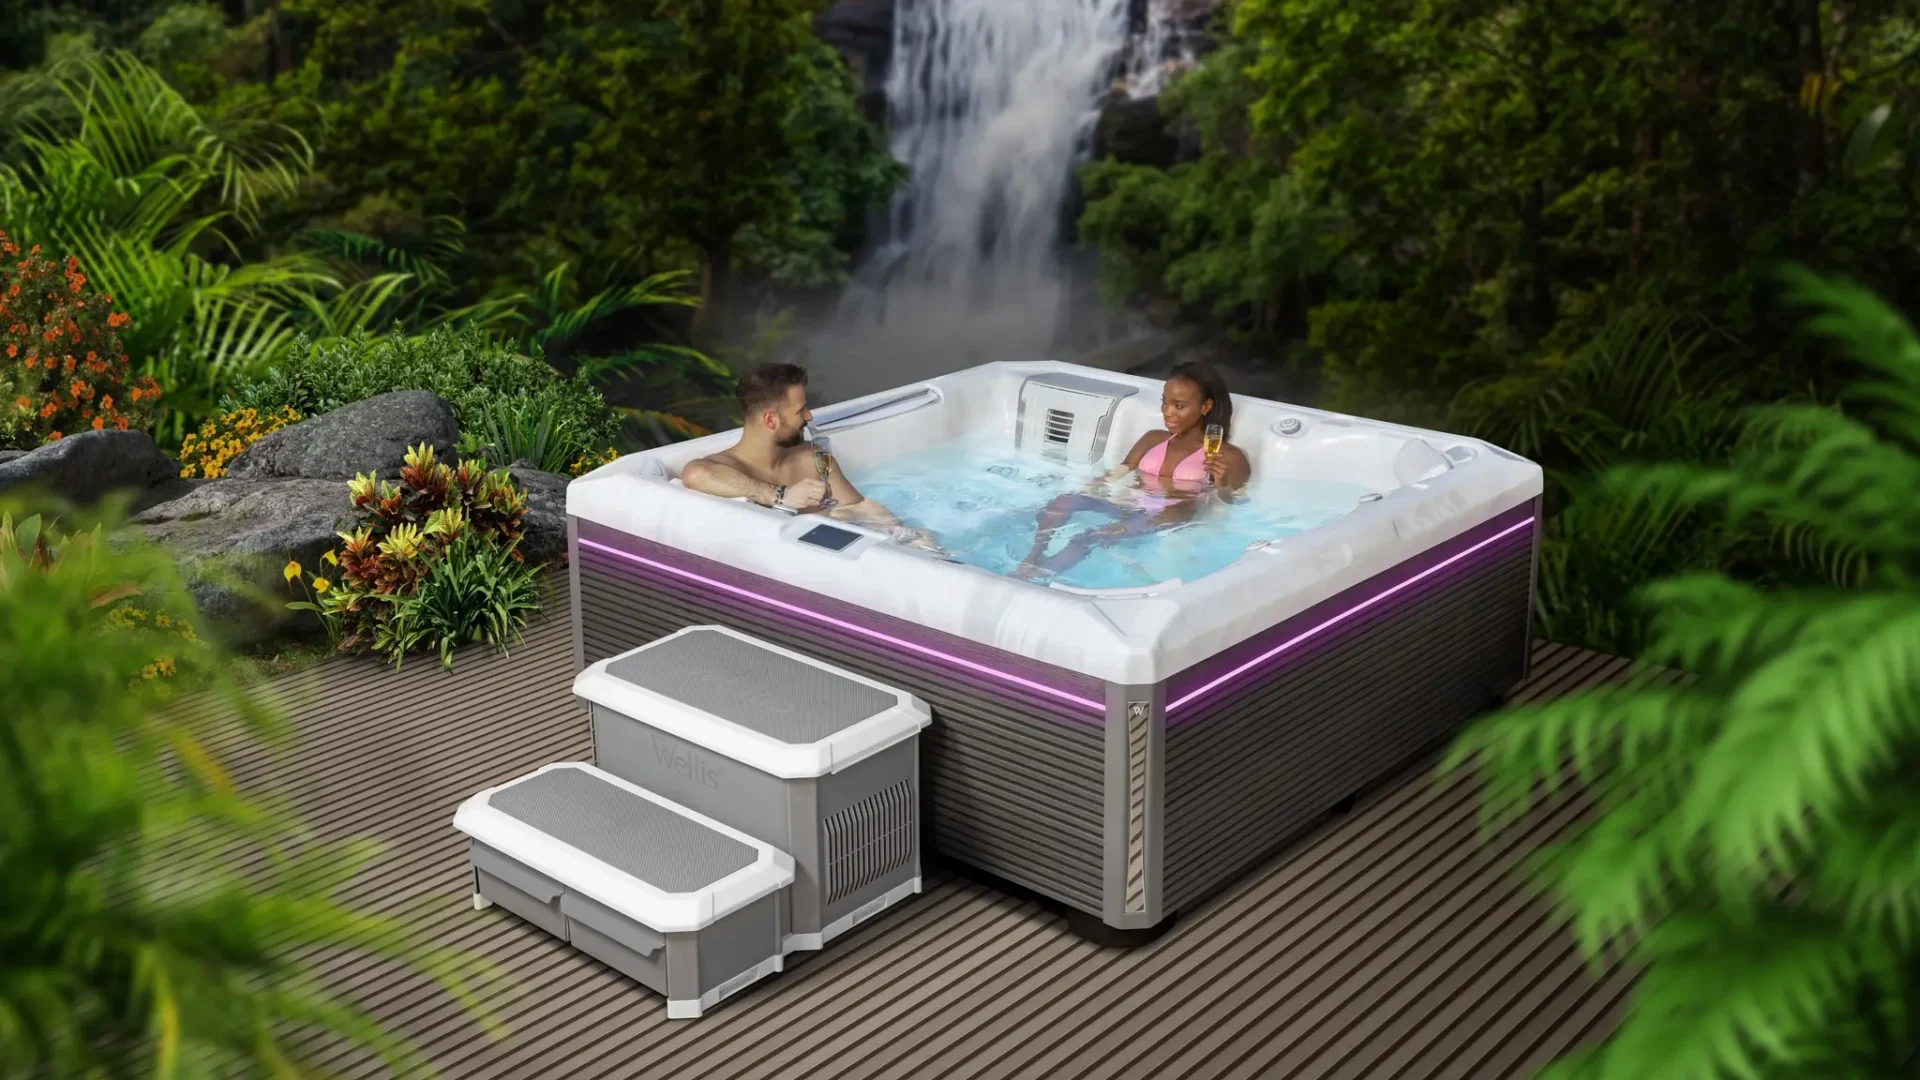 Luxury Hot Tubs for Sale in NC